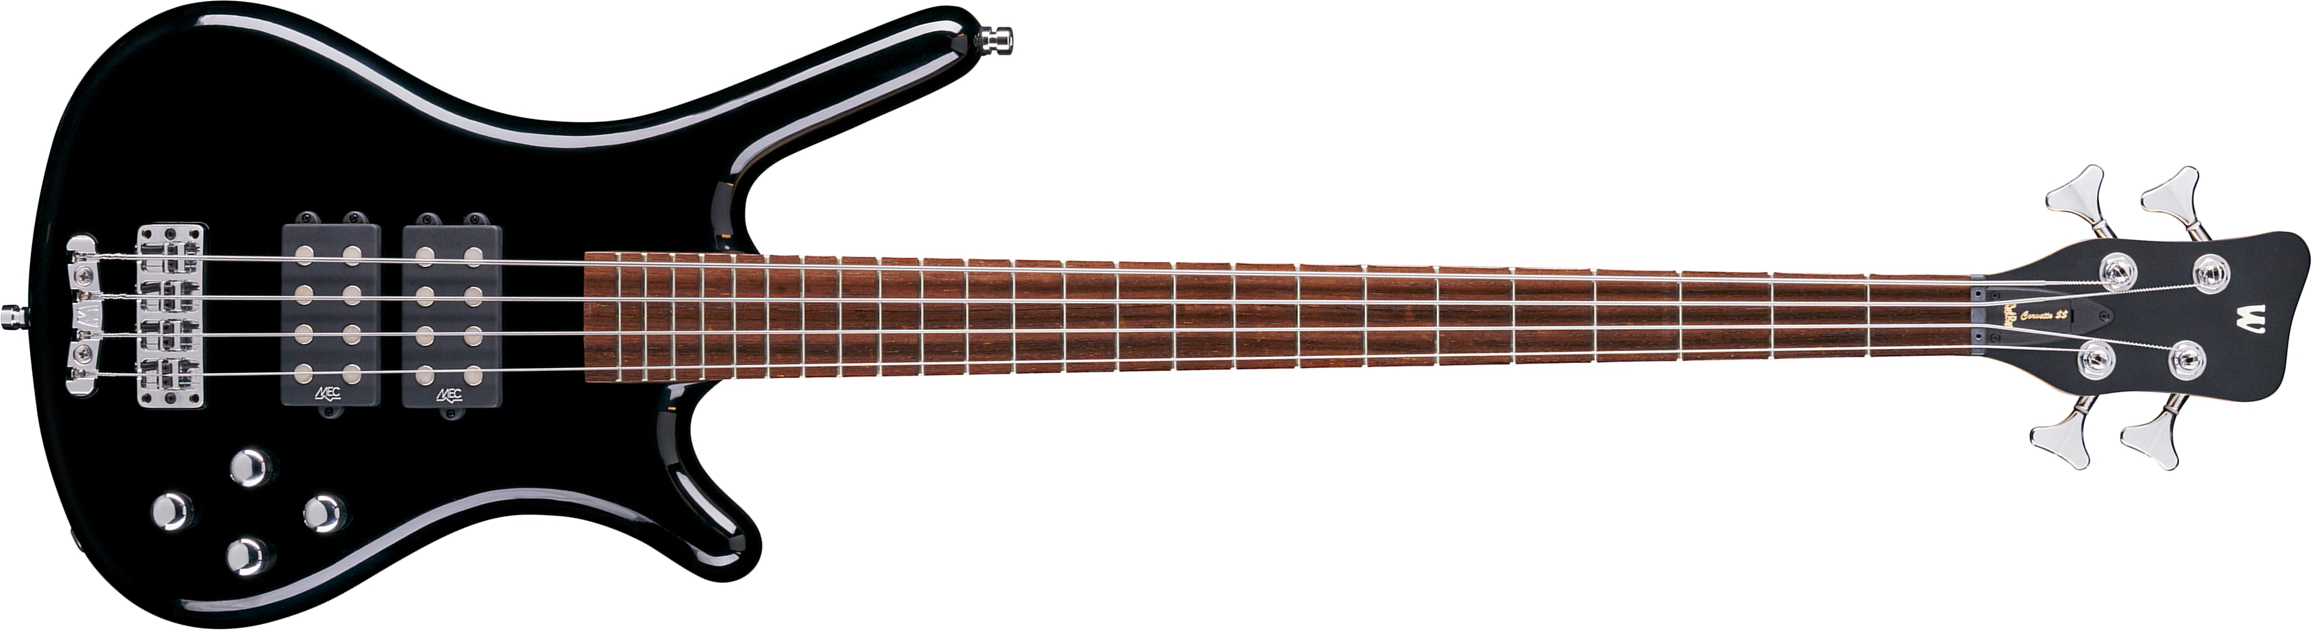 Warwick Corvette $$ 4c Rockbass Active Wen - Solid Black - Solid body electric bass - Main picture